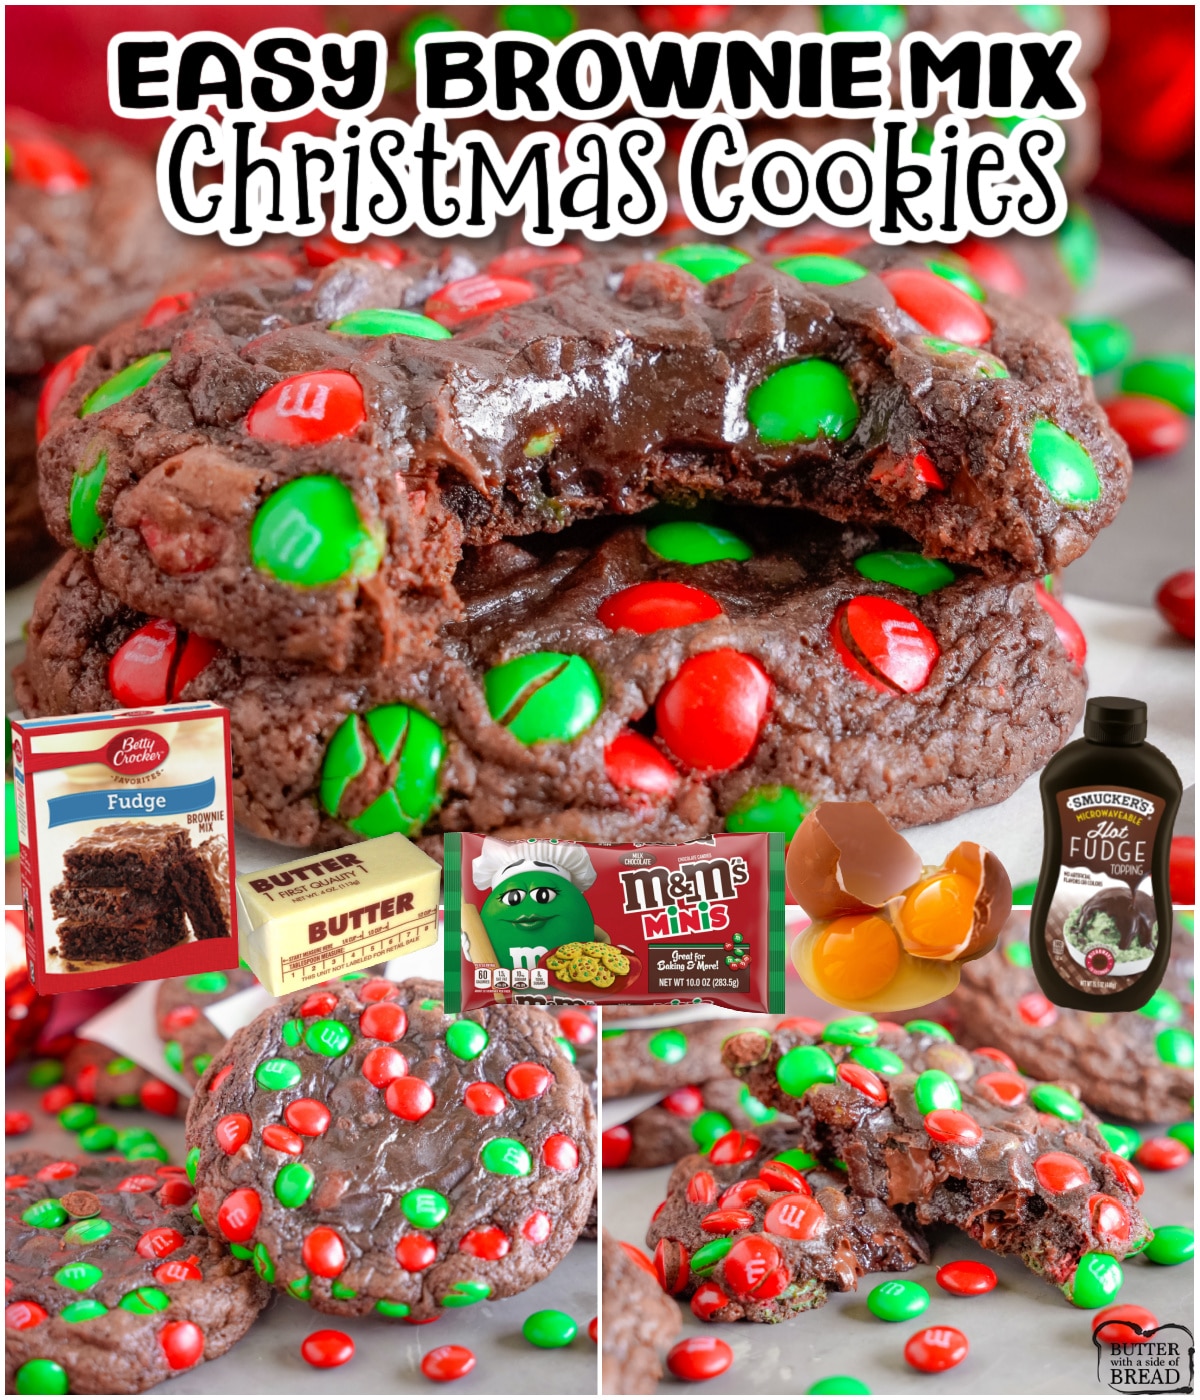 Christmas Brownie Cookies are fudgy, chocolate treats made easily with a brownie mix & M&M candies! Festive colors and lovely flavor adorn these simple brownie mix cookies!